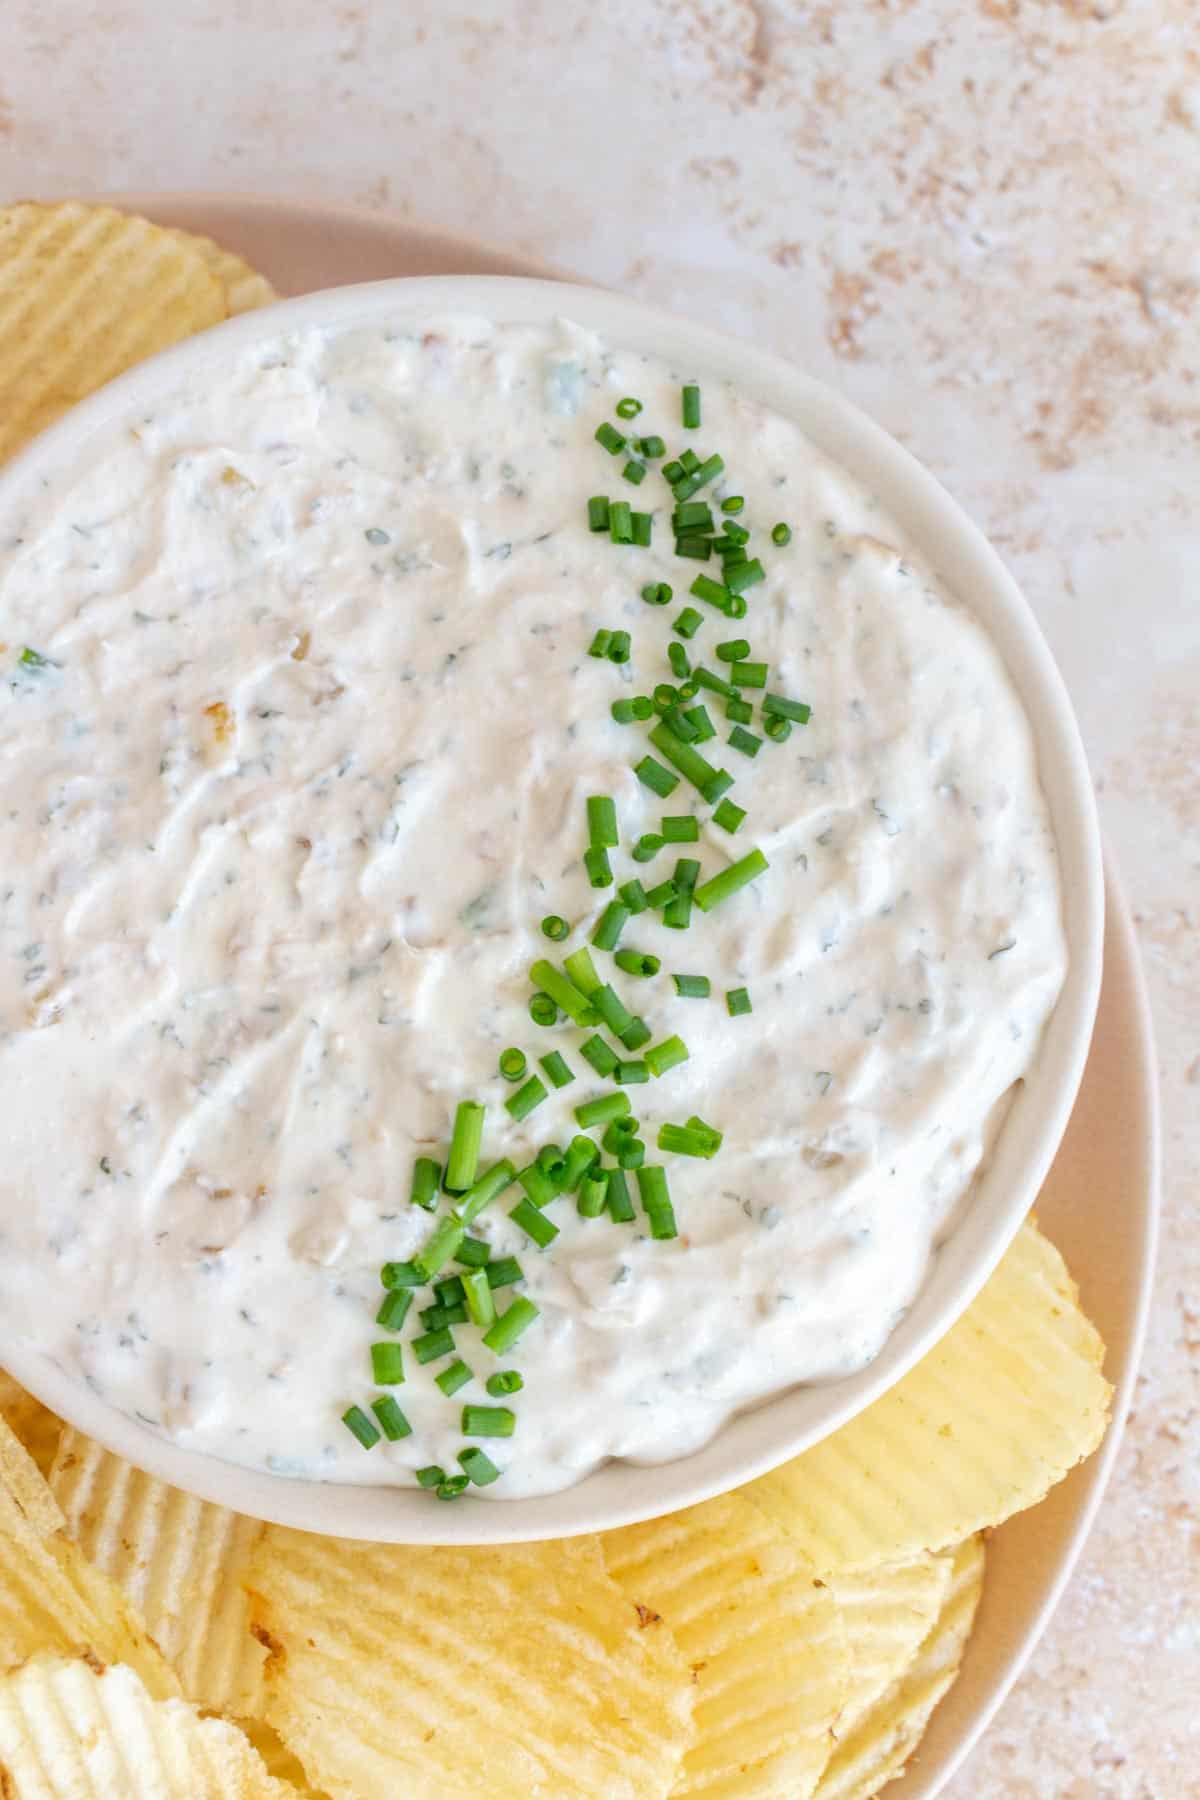 A close up view of a bowl of sour cream and onion dip topped with chopped chips.